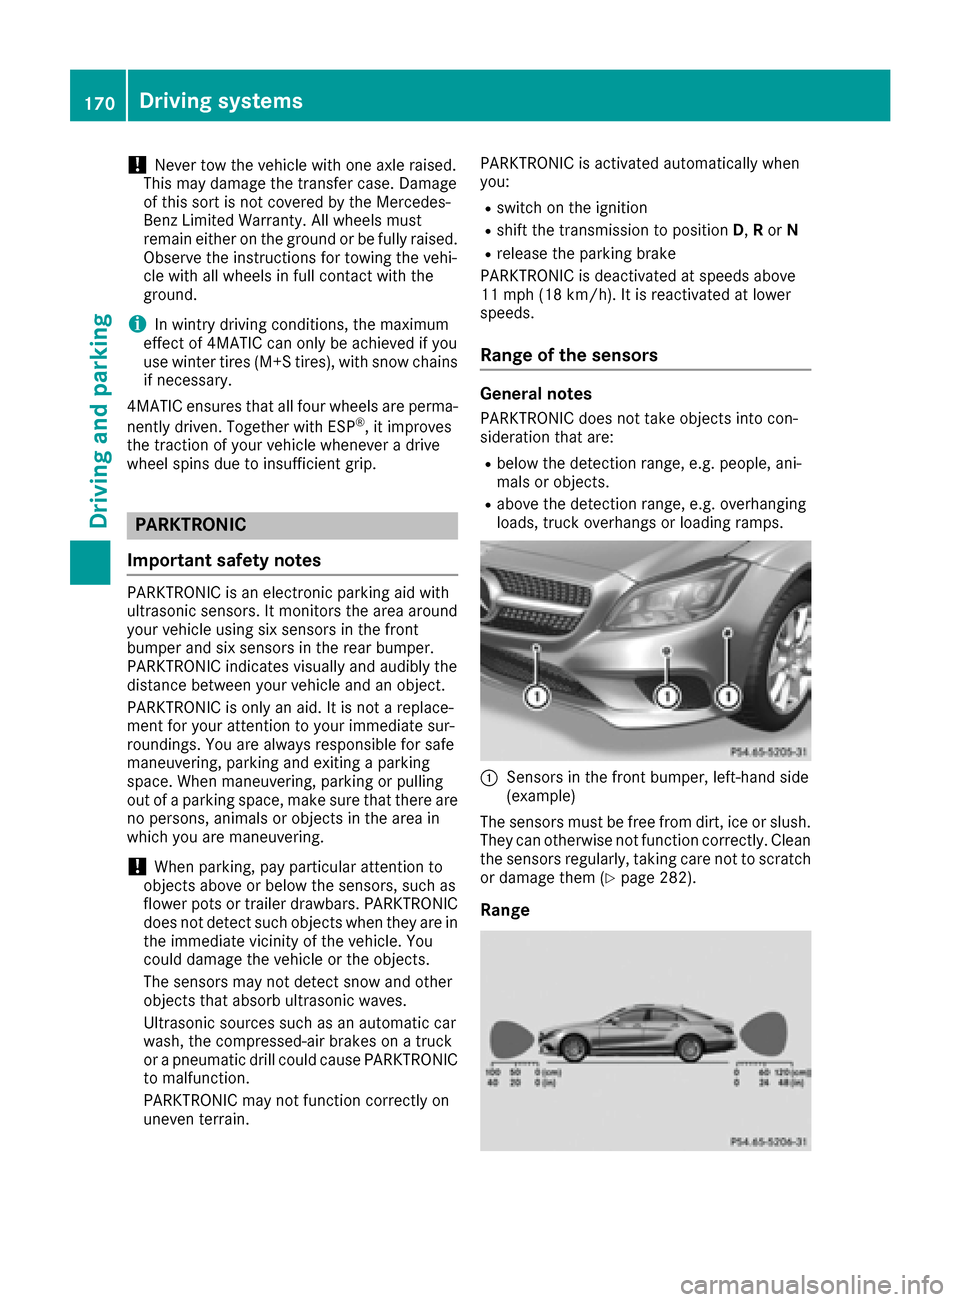 MERCEDES-BENZ CLS-Class 2016 W218 User Guide !Never tow the vehicle with one axle raised.
This may damage the transfer case. Damage
of this sort is not covered by the Mercedes-
Benz Limited Warranty. All wheels must
remain either on the ground o